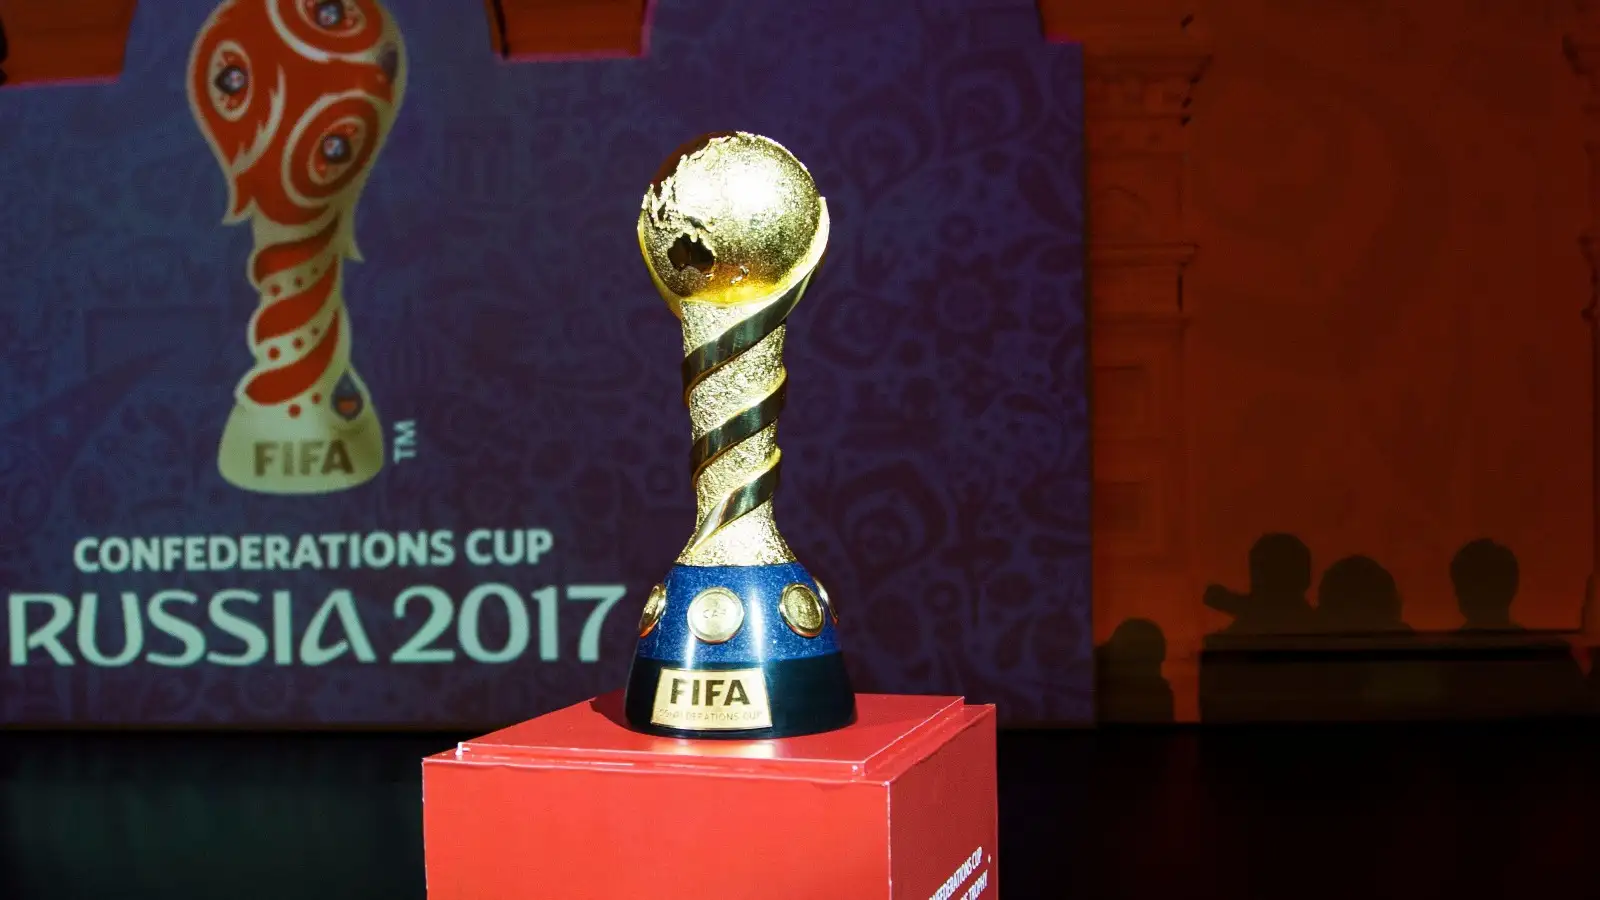 Can you name every team to reach the final of the FIFA Confederations Cup?